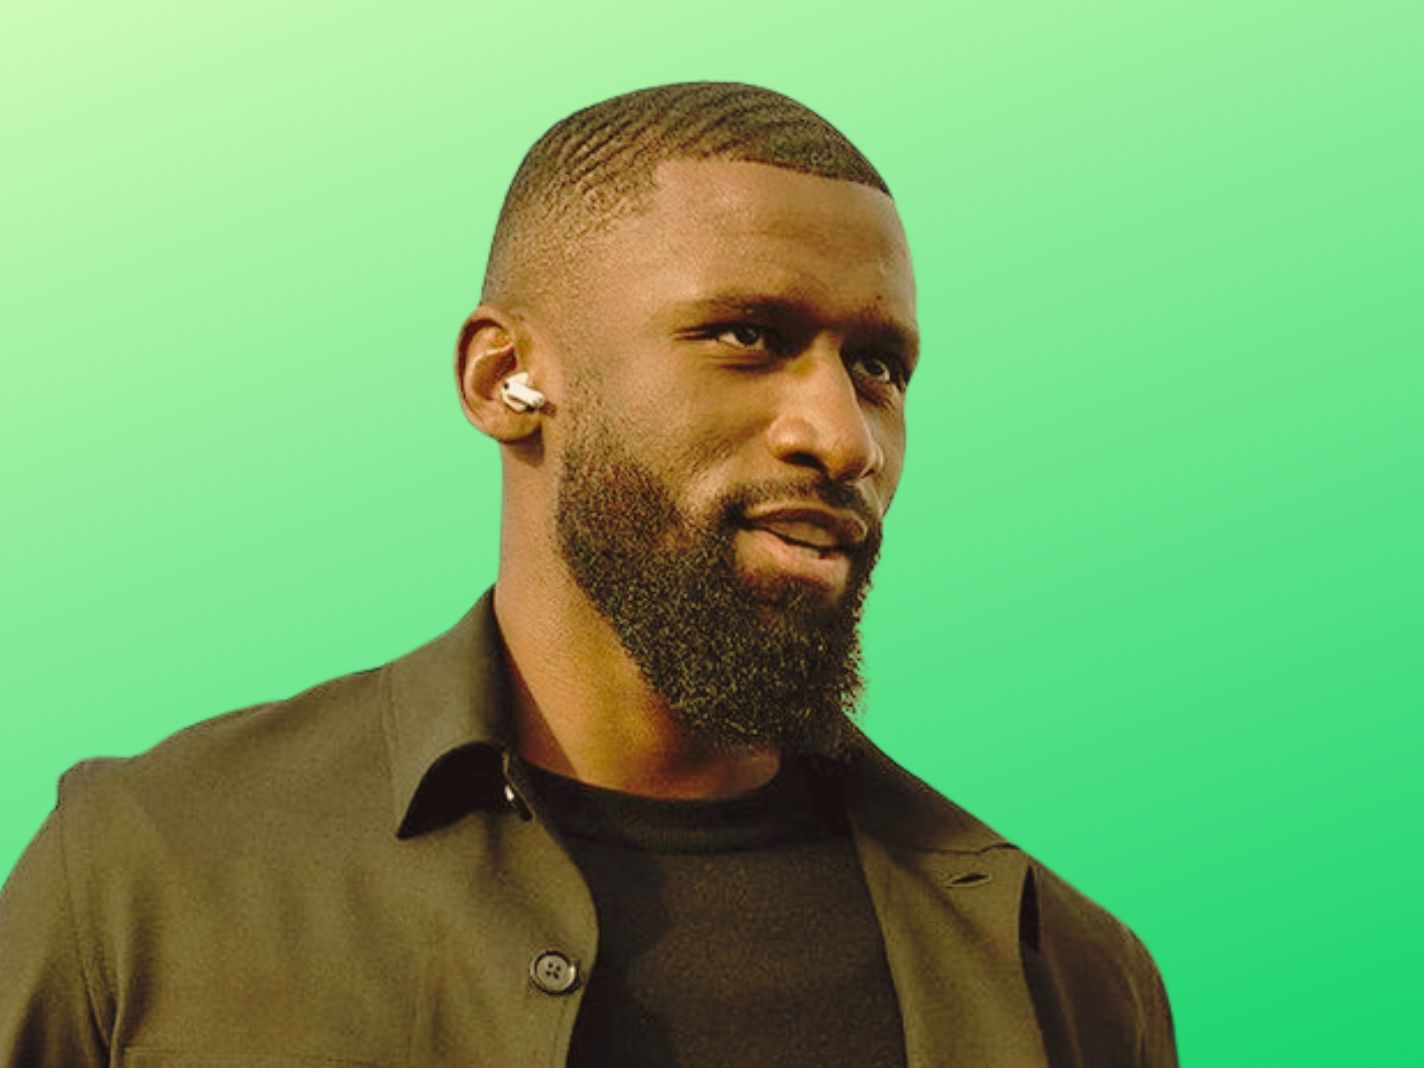 Antonio Rudiger with an airpod and black attire